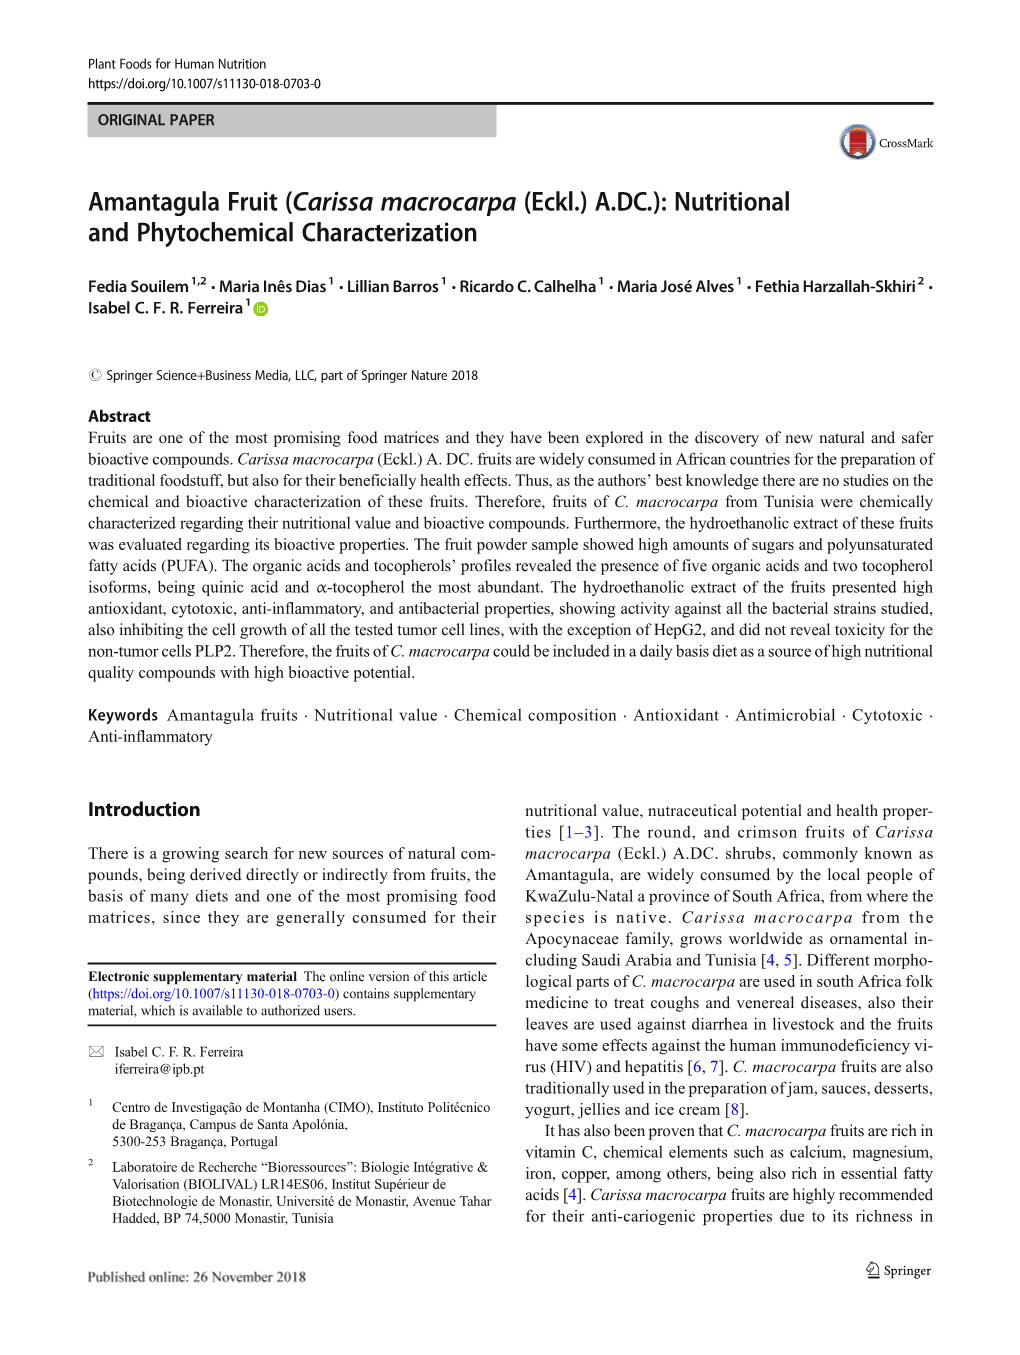 Carissa Macrocarpa (Eckl.) A.DC.): Nutritional and Phytochemical Characterization